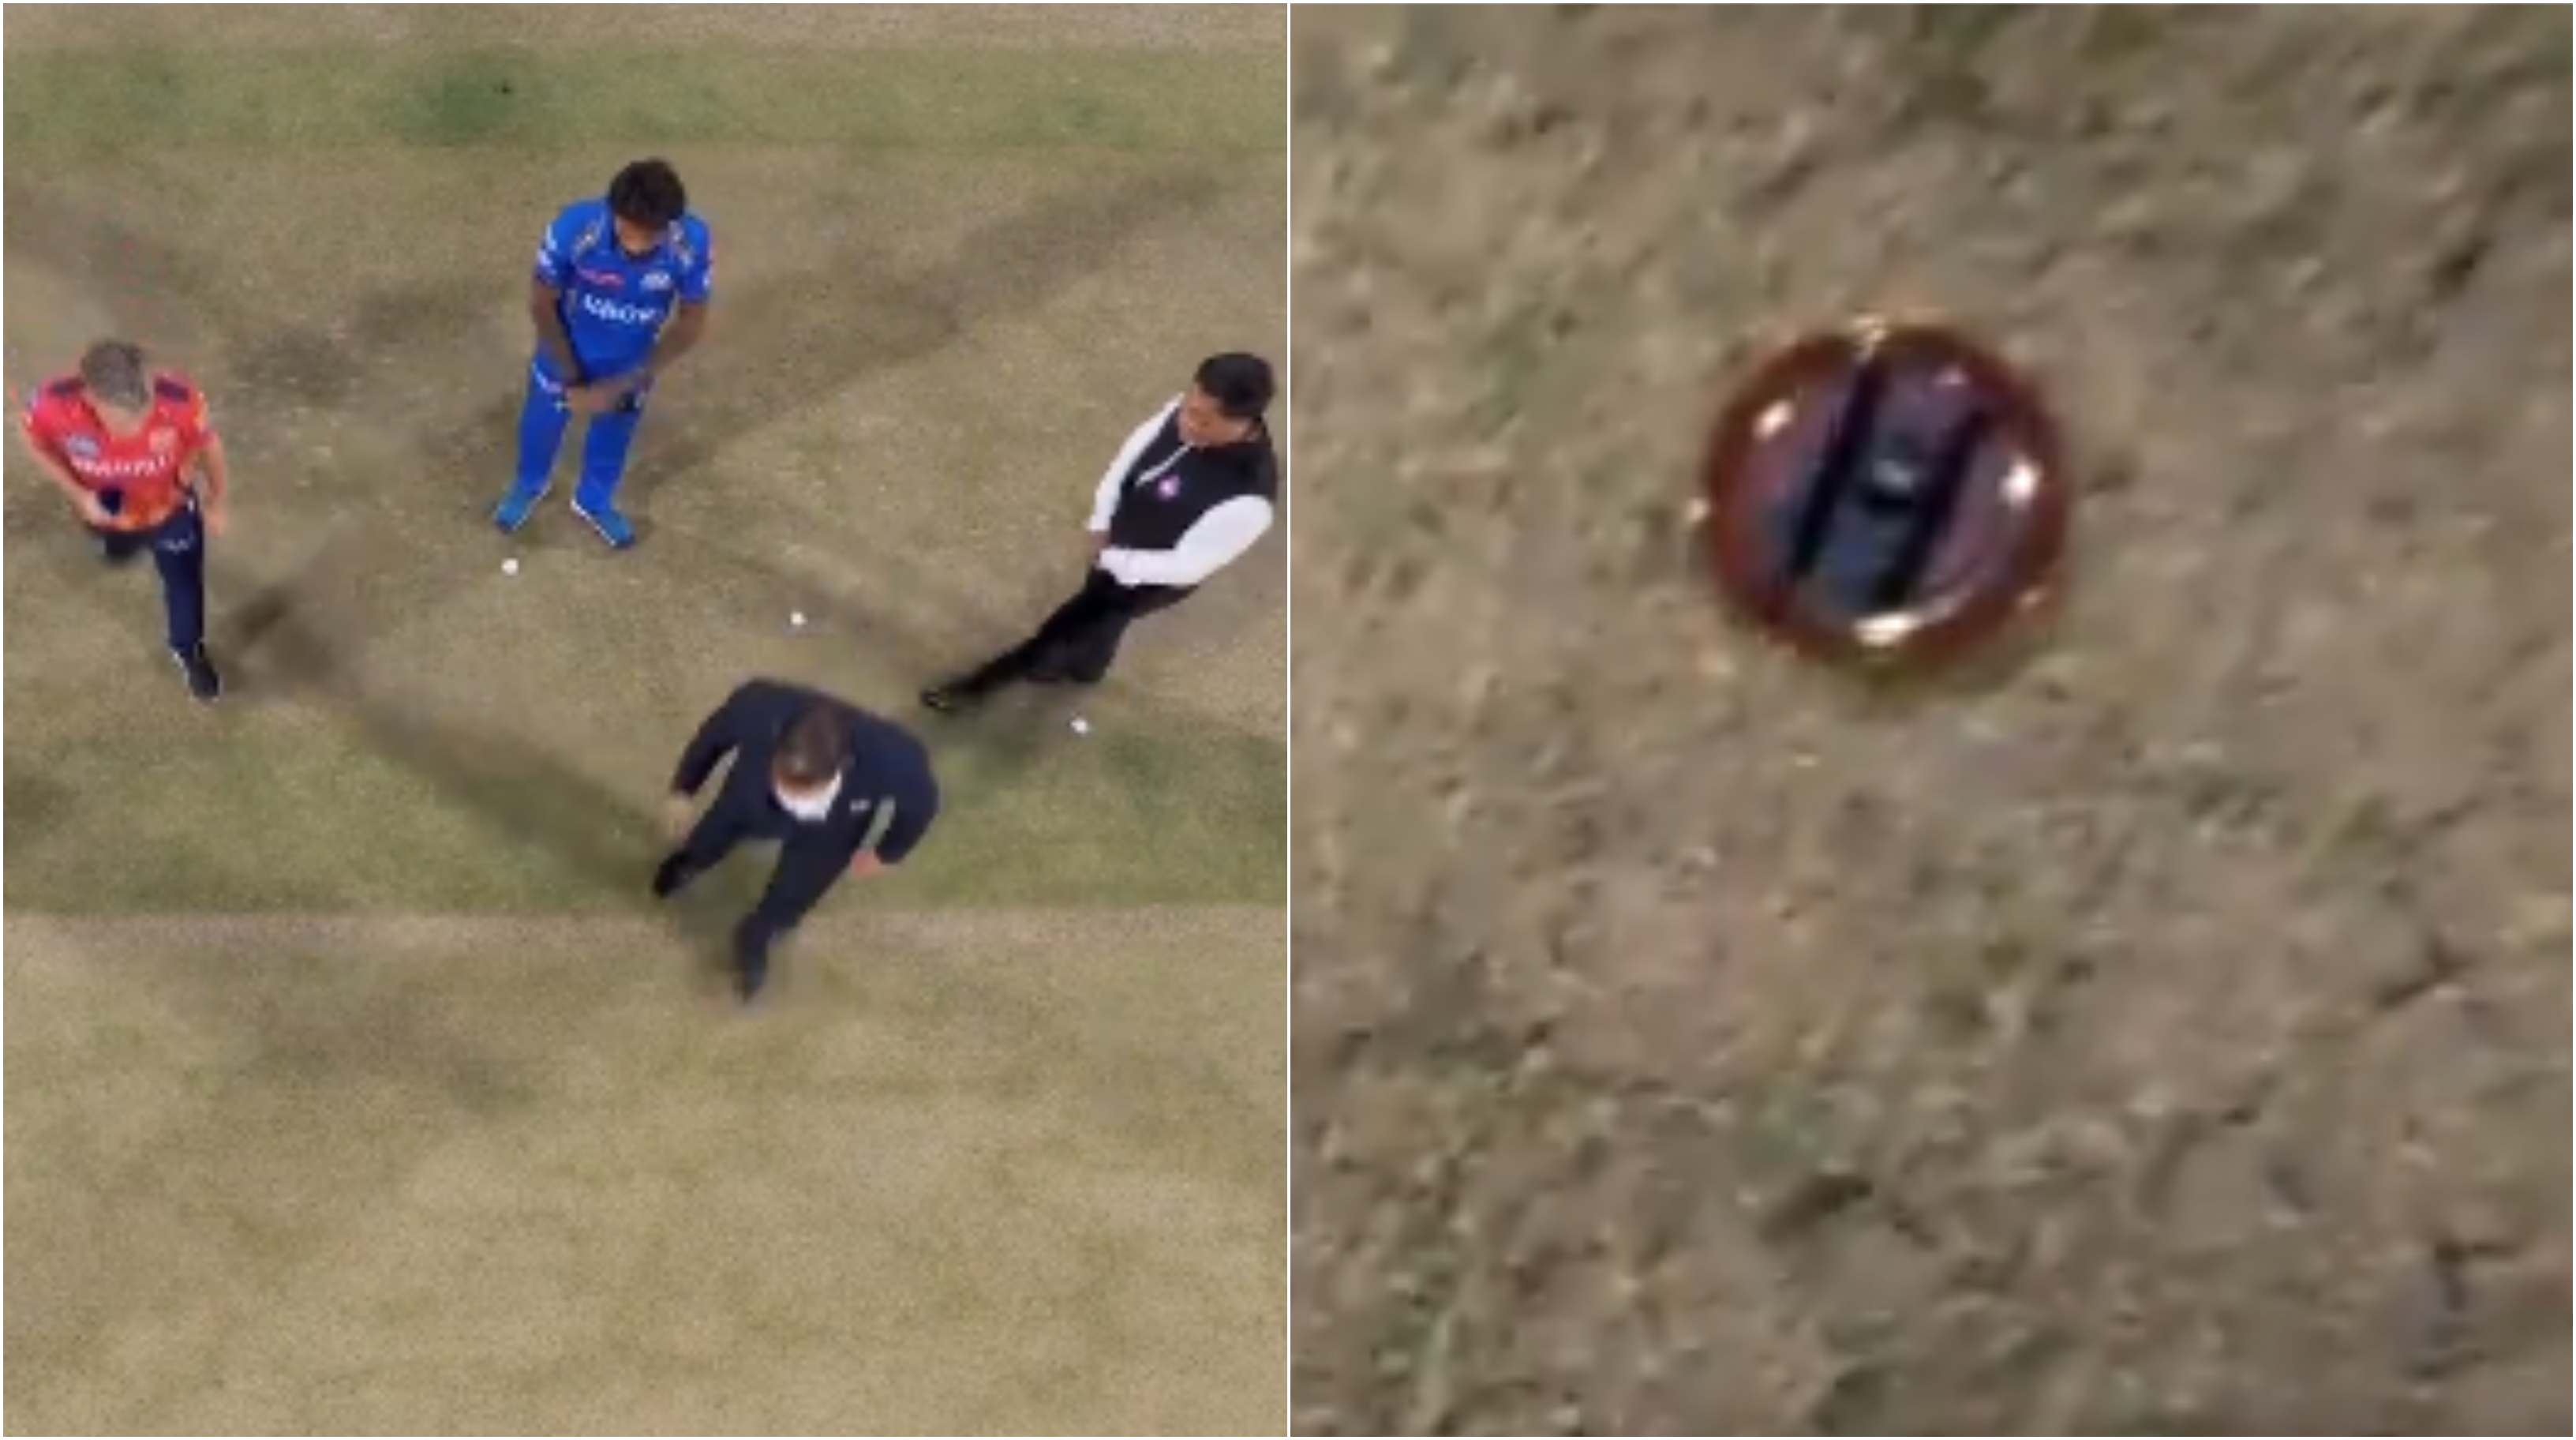 Camera zoomed into the coin following the toss in PBKS vs MI match | BCCI-IPL